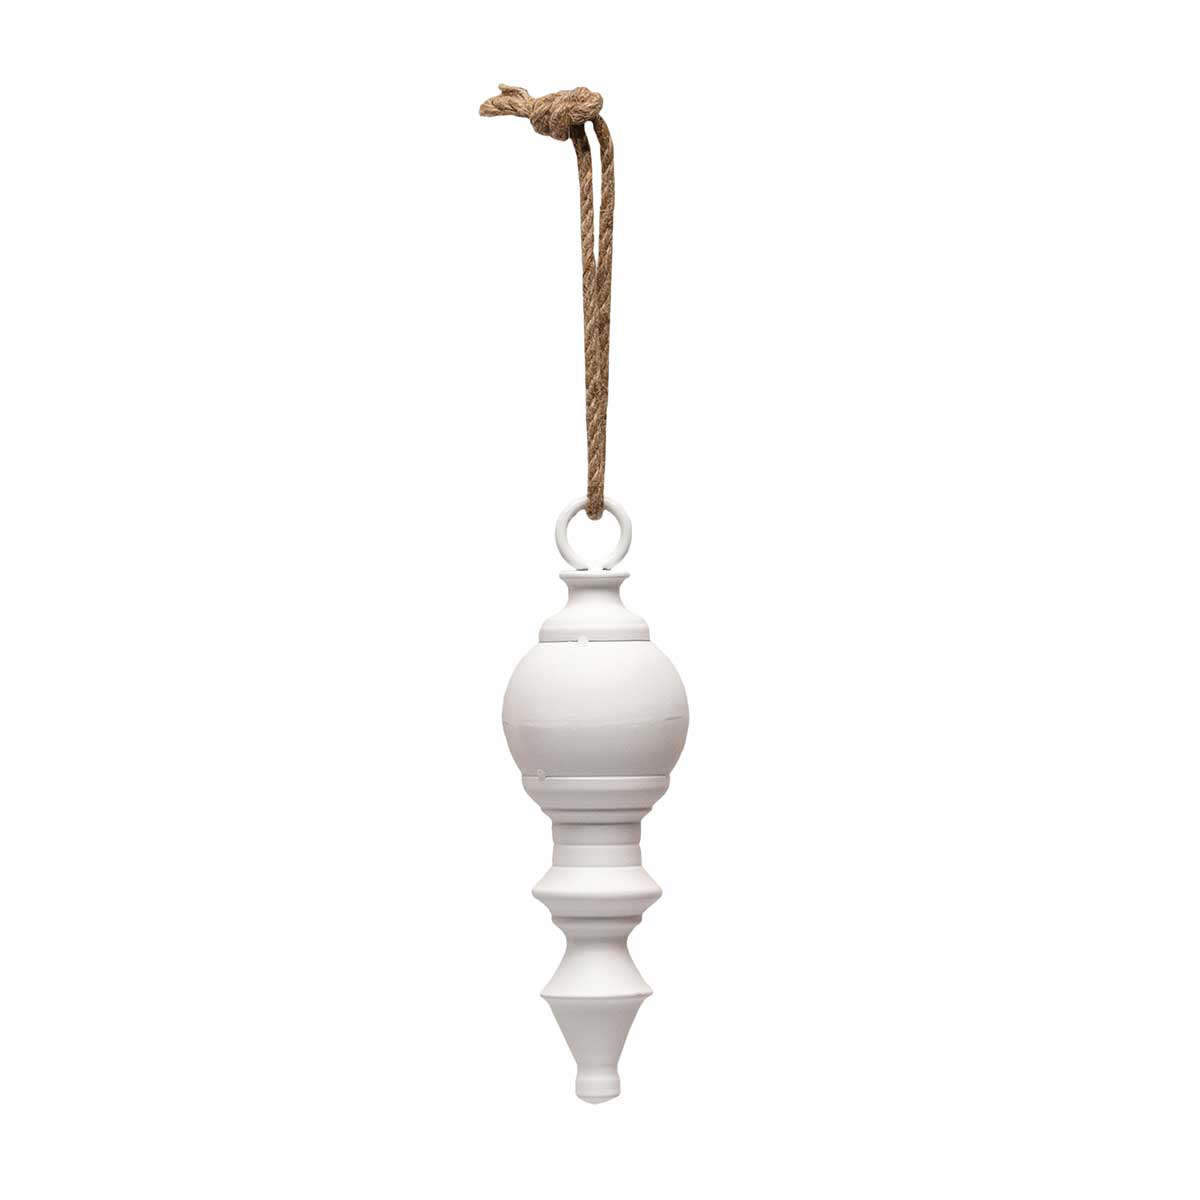 !FINIAL METAL ORNAMENT MATTE WHITE WITH ROPE HANGER